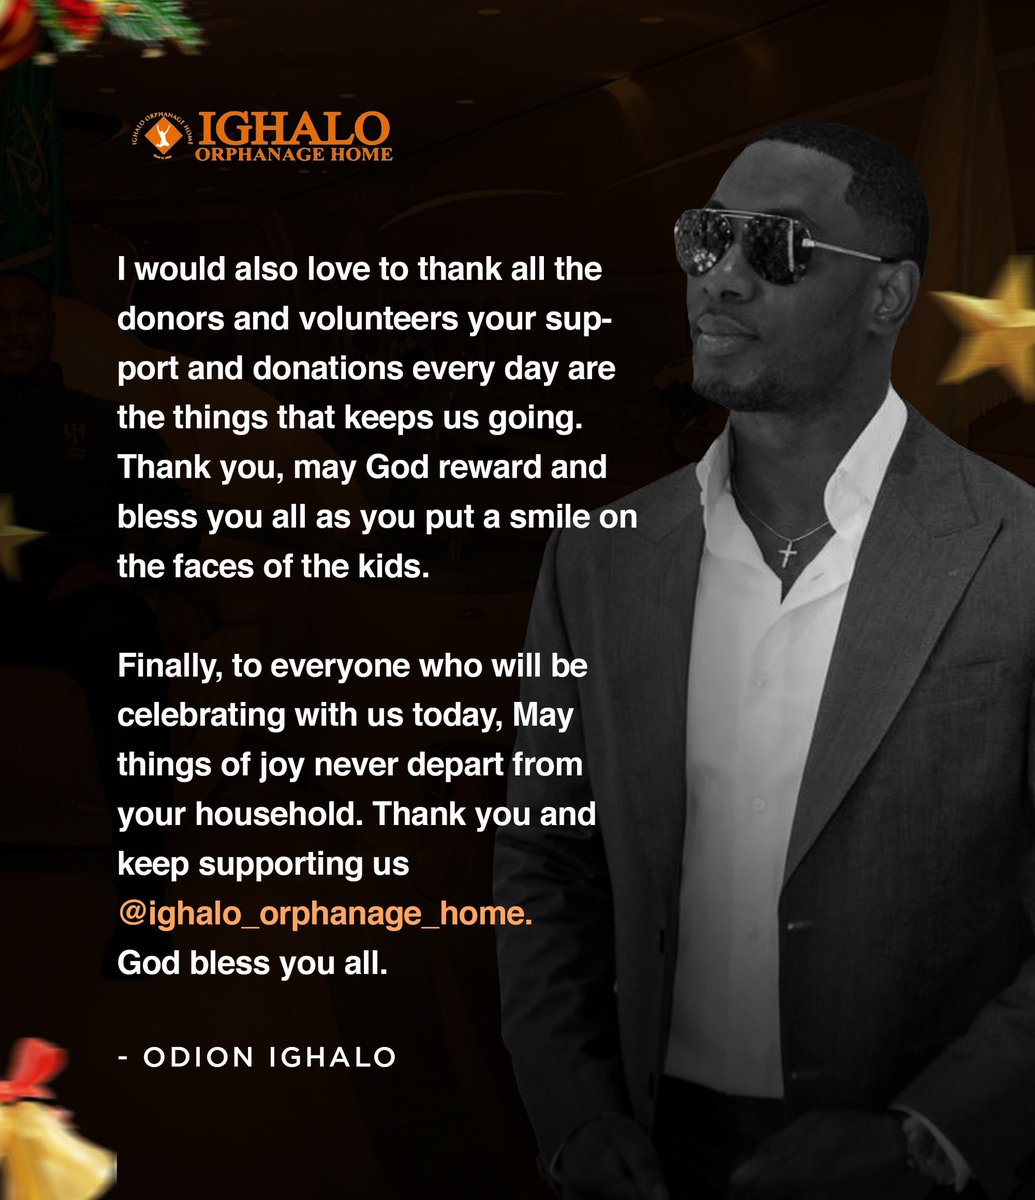 To all the donors, volunteers, caregivers and everyone who will be celebrating with us today, May things of joy never depart from your household. Happy Anniversary to @ighalo_orphanage_home 🧡